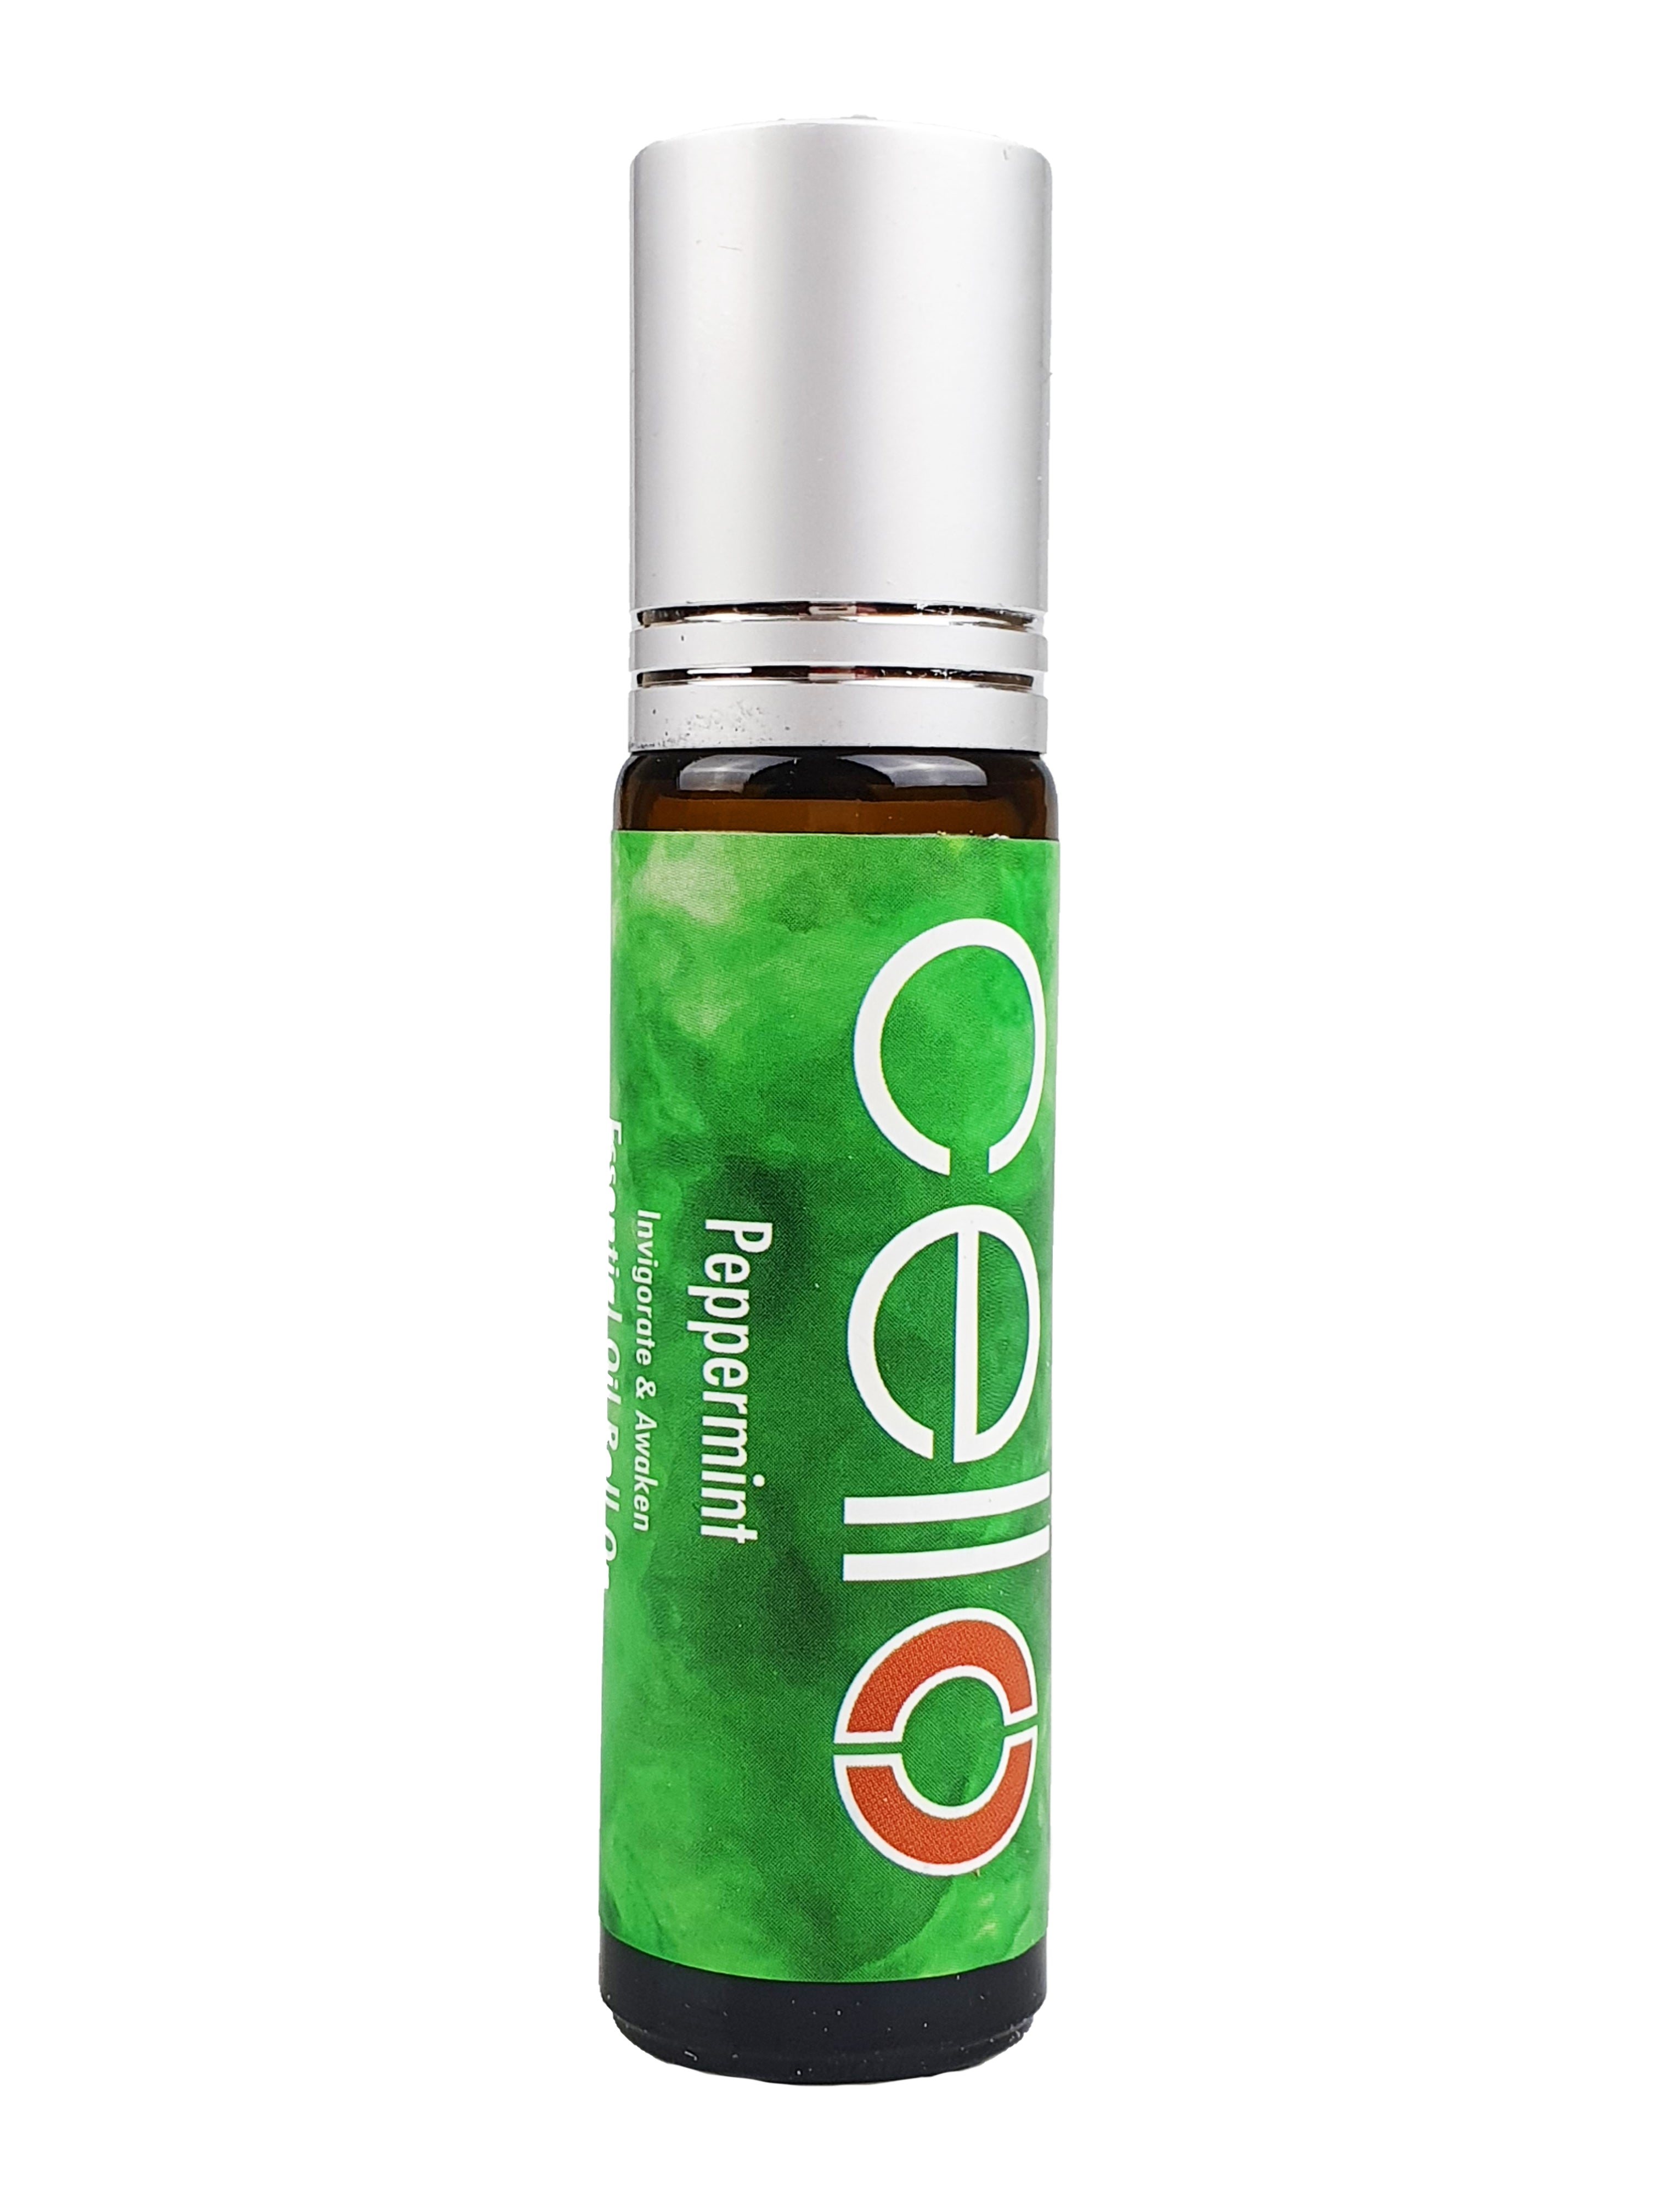 Cello - Peppermint Roll On Natural Essential Oil 8.8ml